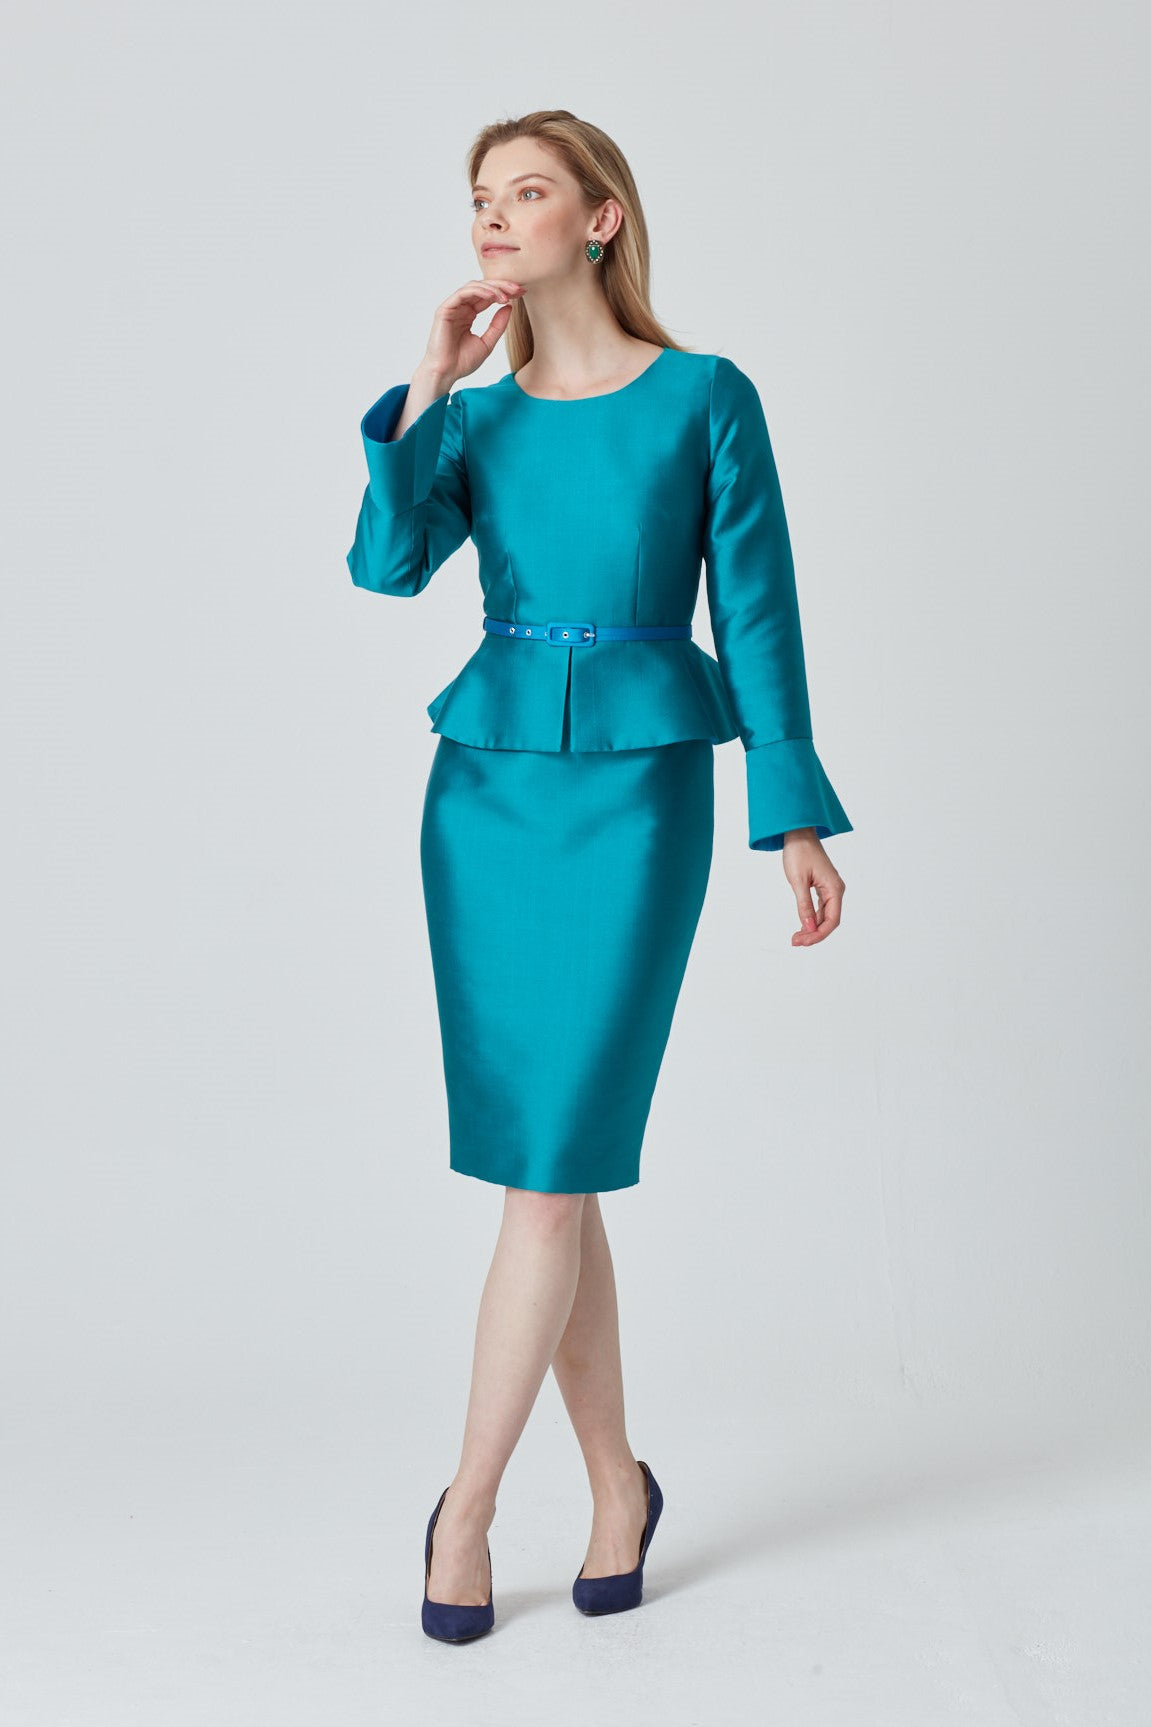 Emerald and Teal Silk Peplum Dress with Fluted Cuffs - Catherine